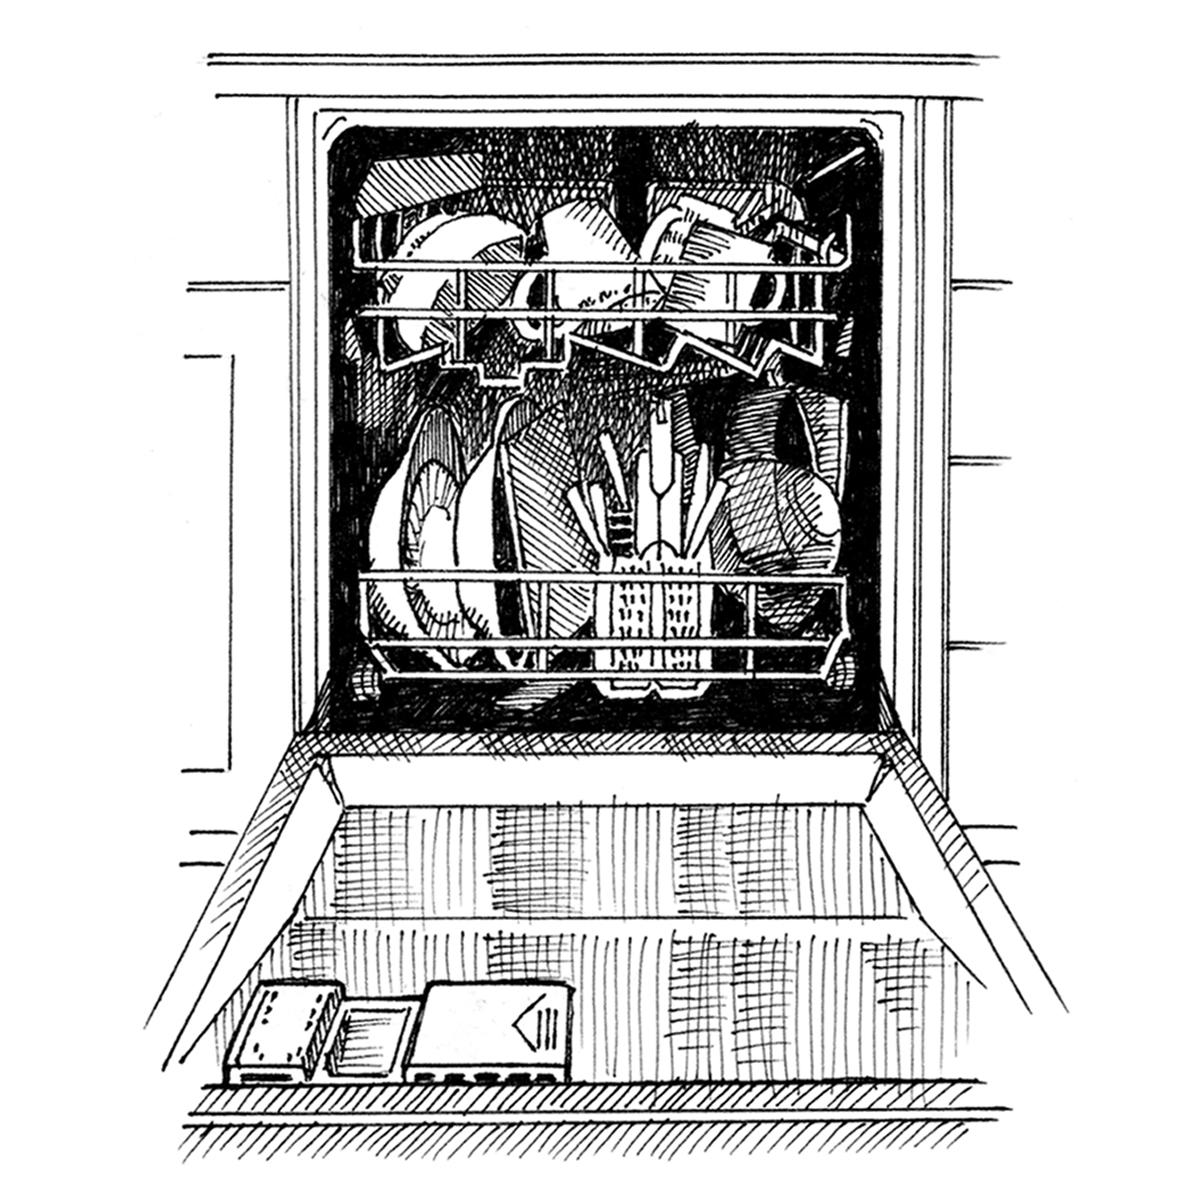 Limited edition print from pen and ink drawing of the inside of a dishwasher